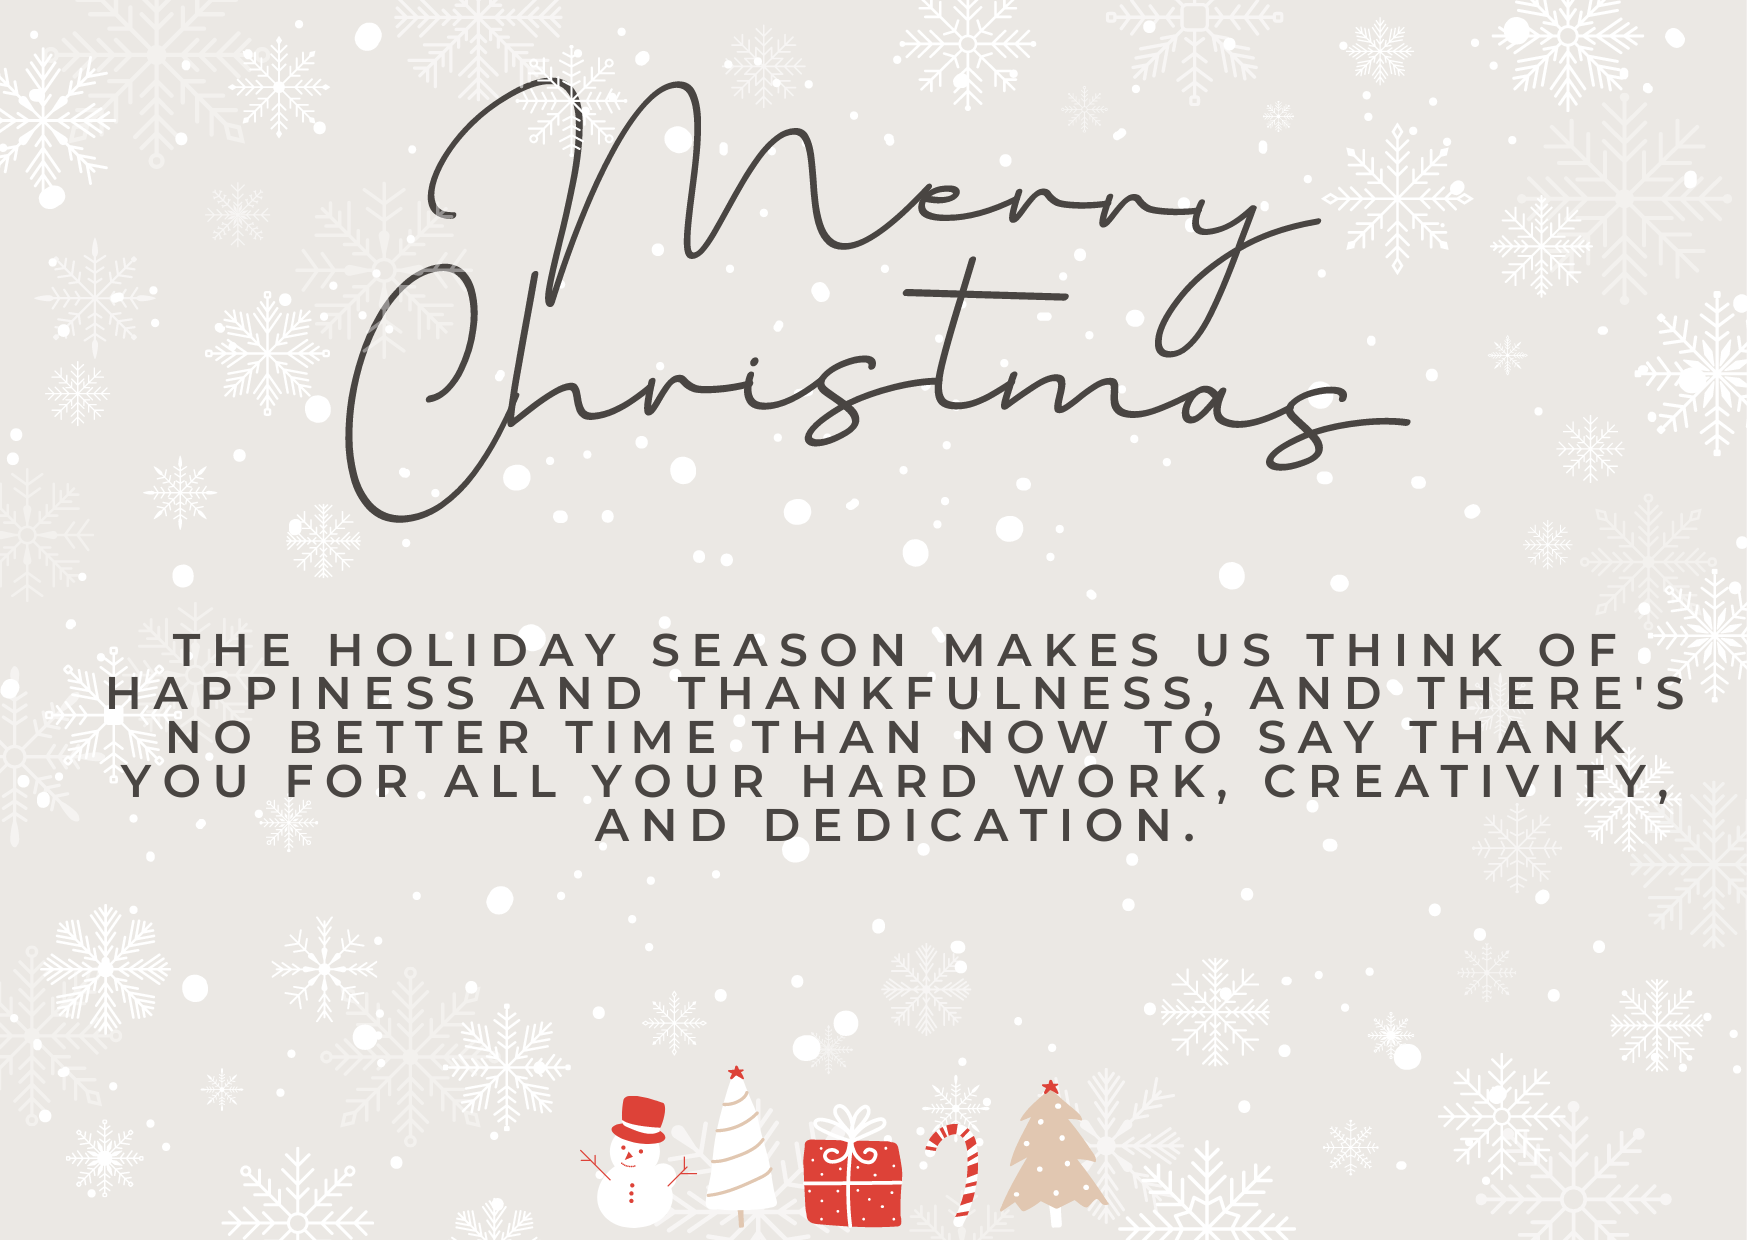 Christmas Wishes for employees 2022